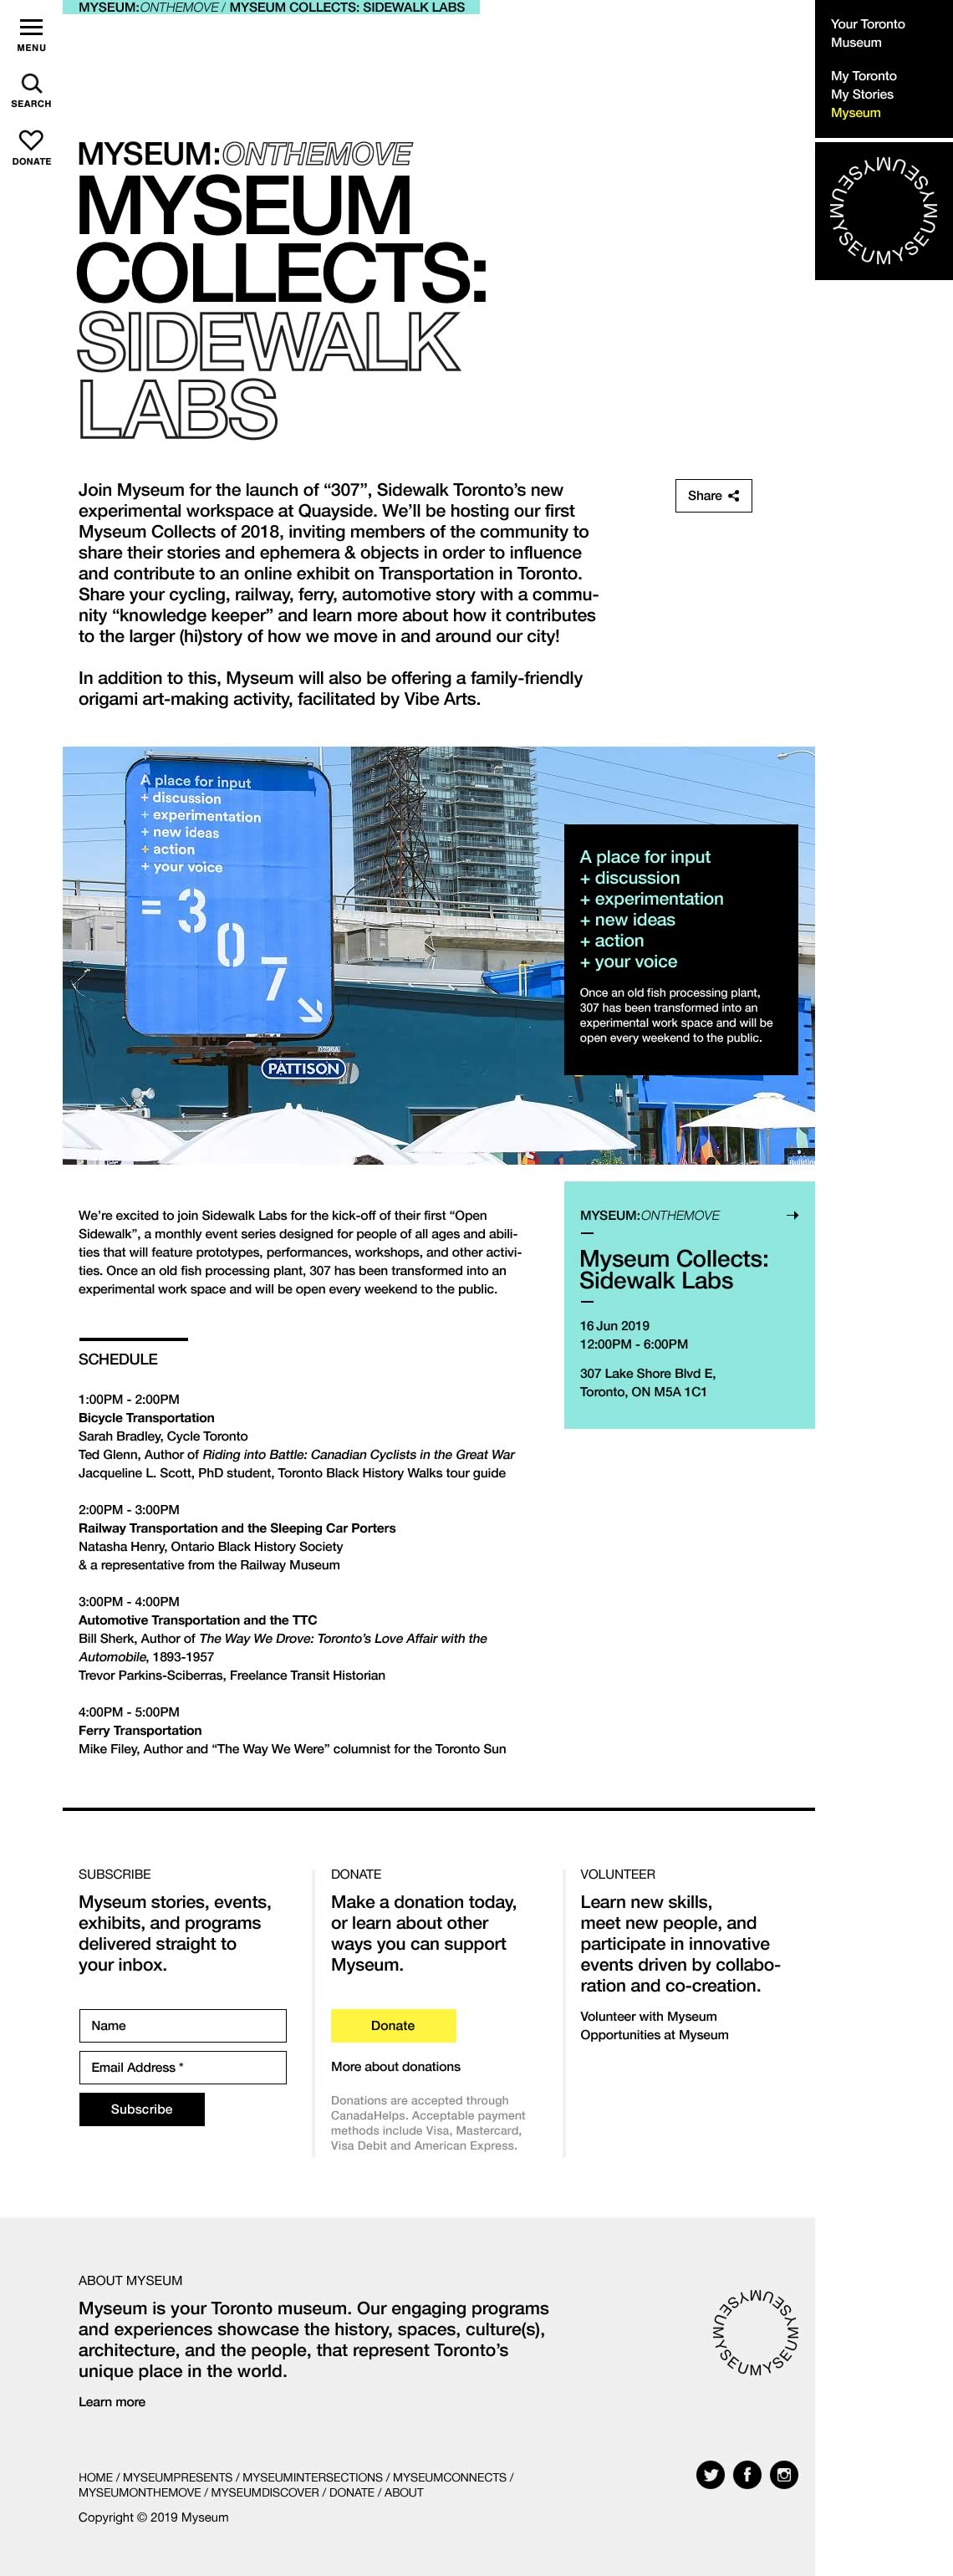 Capture of the full 'MYSEUM COLLECTS: SIDEWALK LABS' event detail page from the Myseum website